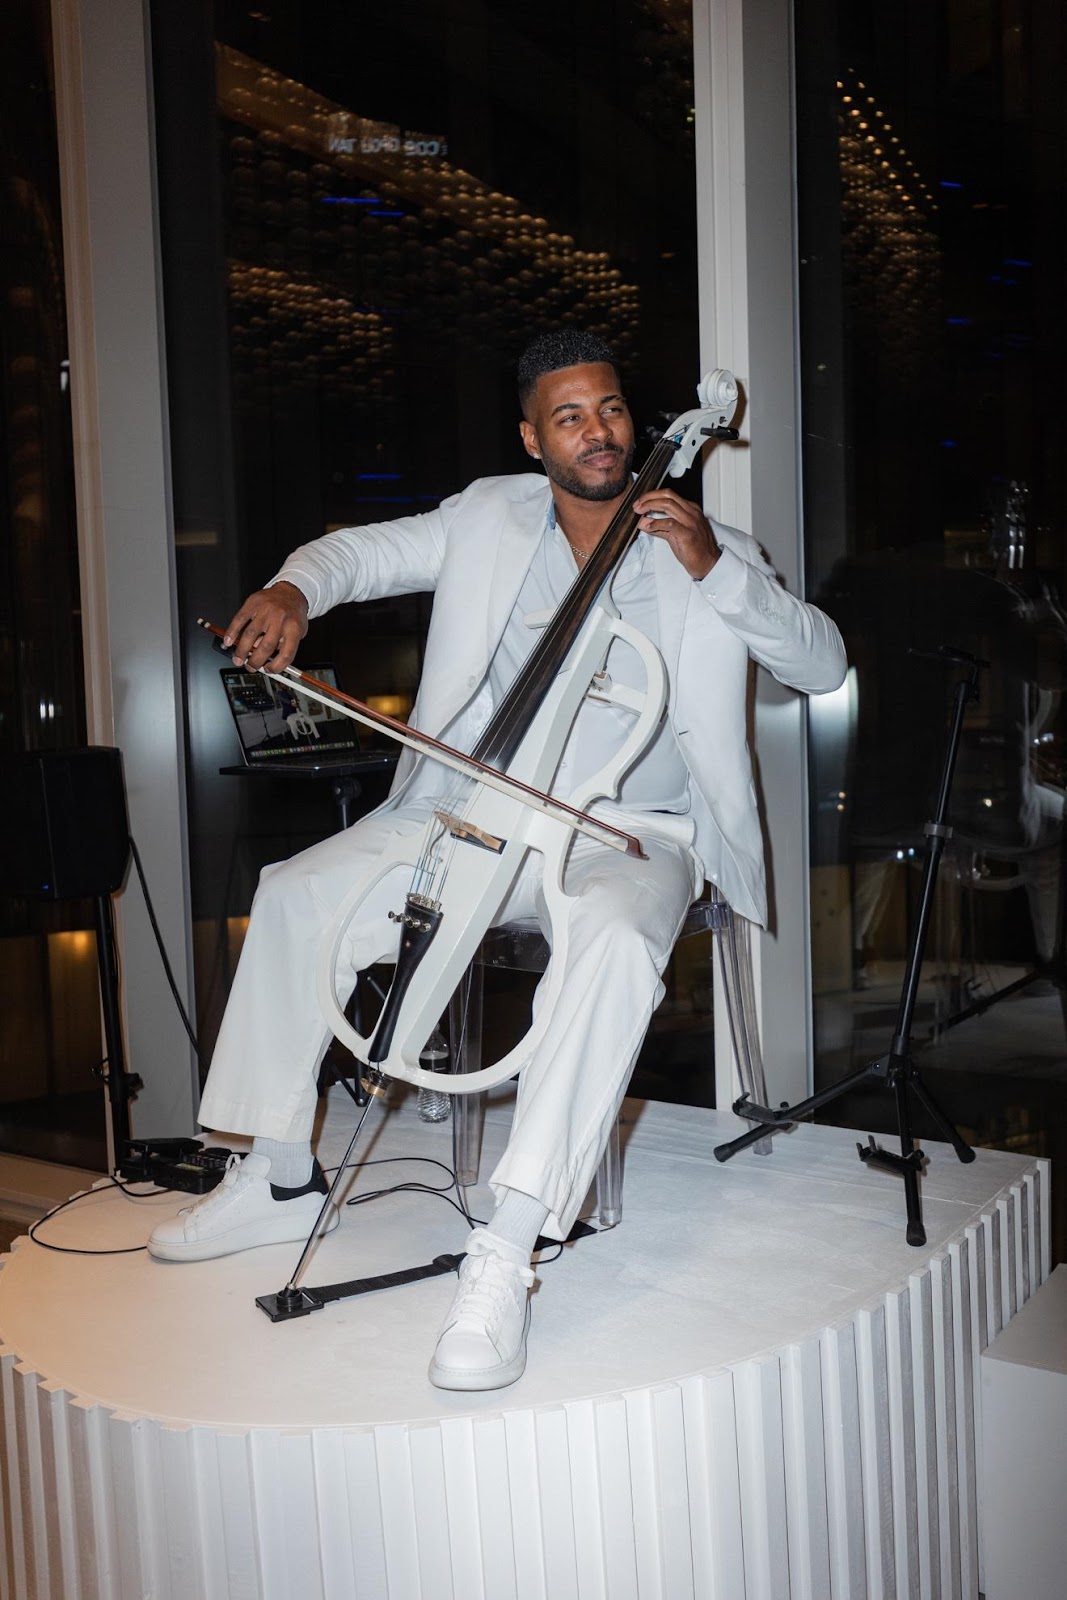 A person in white suit playing a cello

Description automatically generated